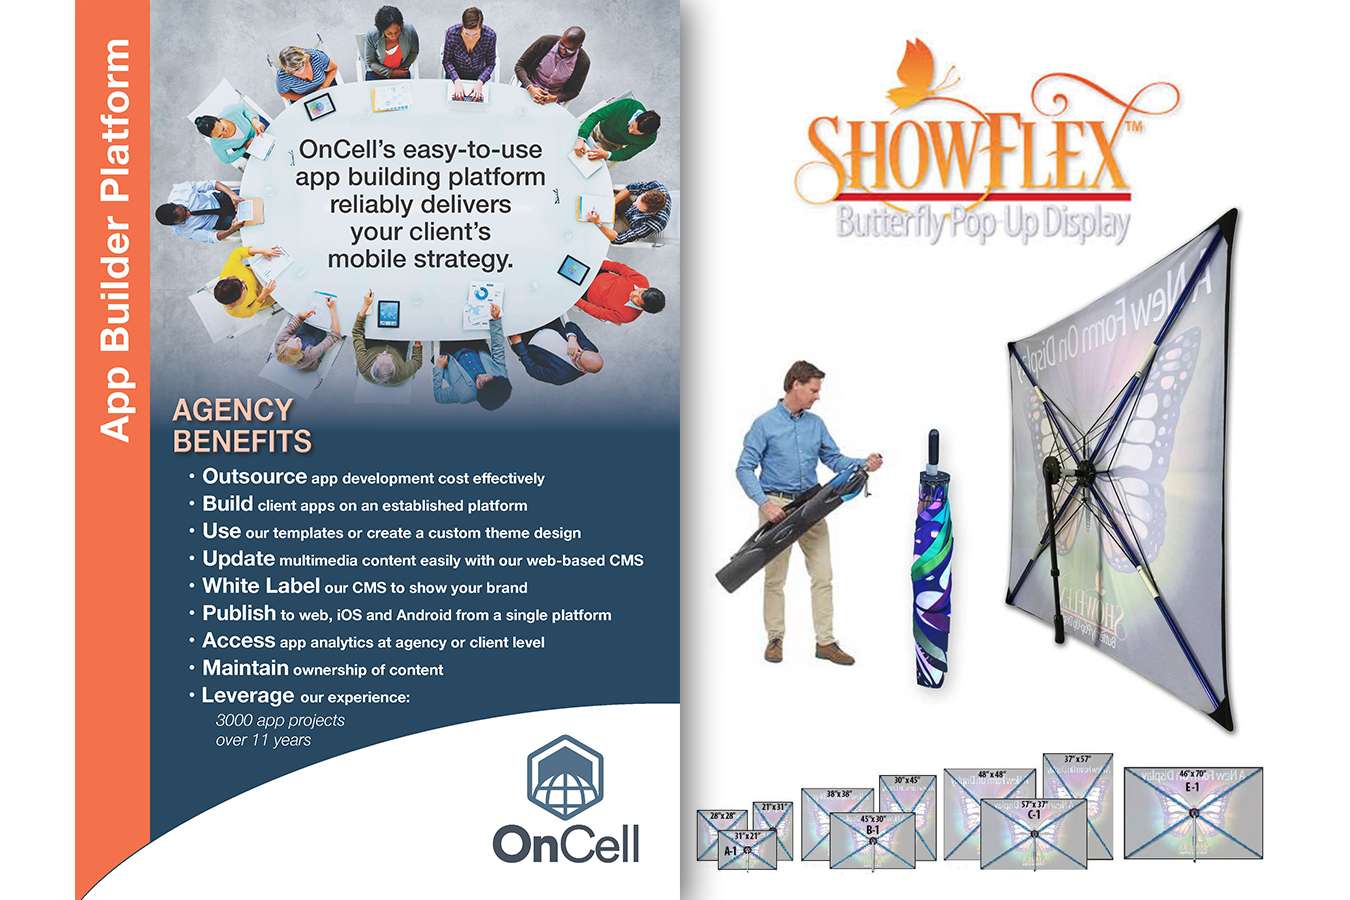 ONCELL APPBldr V2 final : Showflex fabric displays offer light-weight easy to use option for table top to back wall units